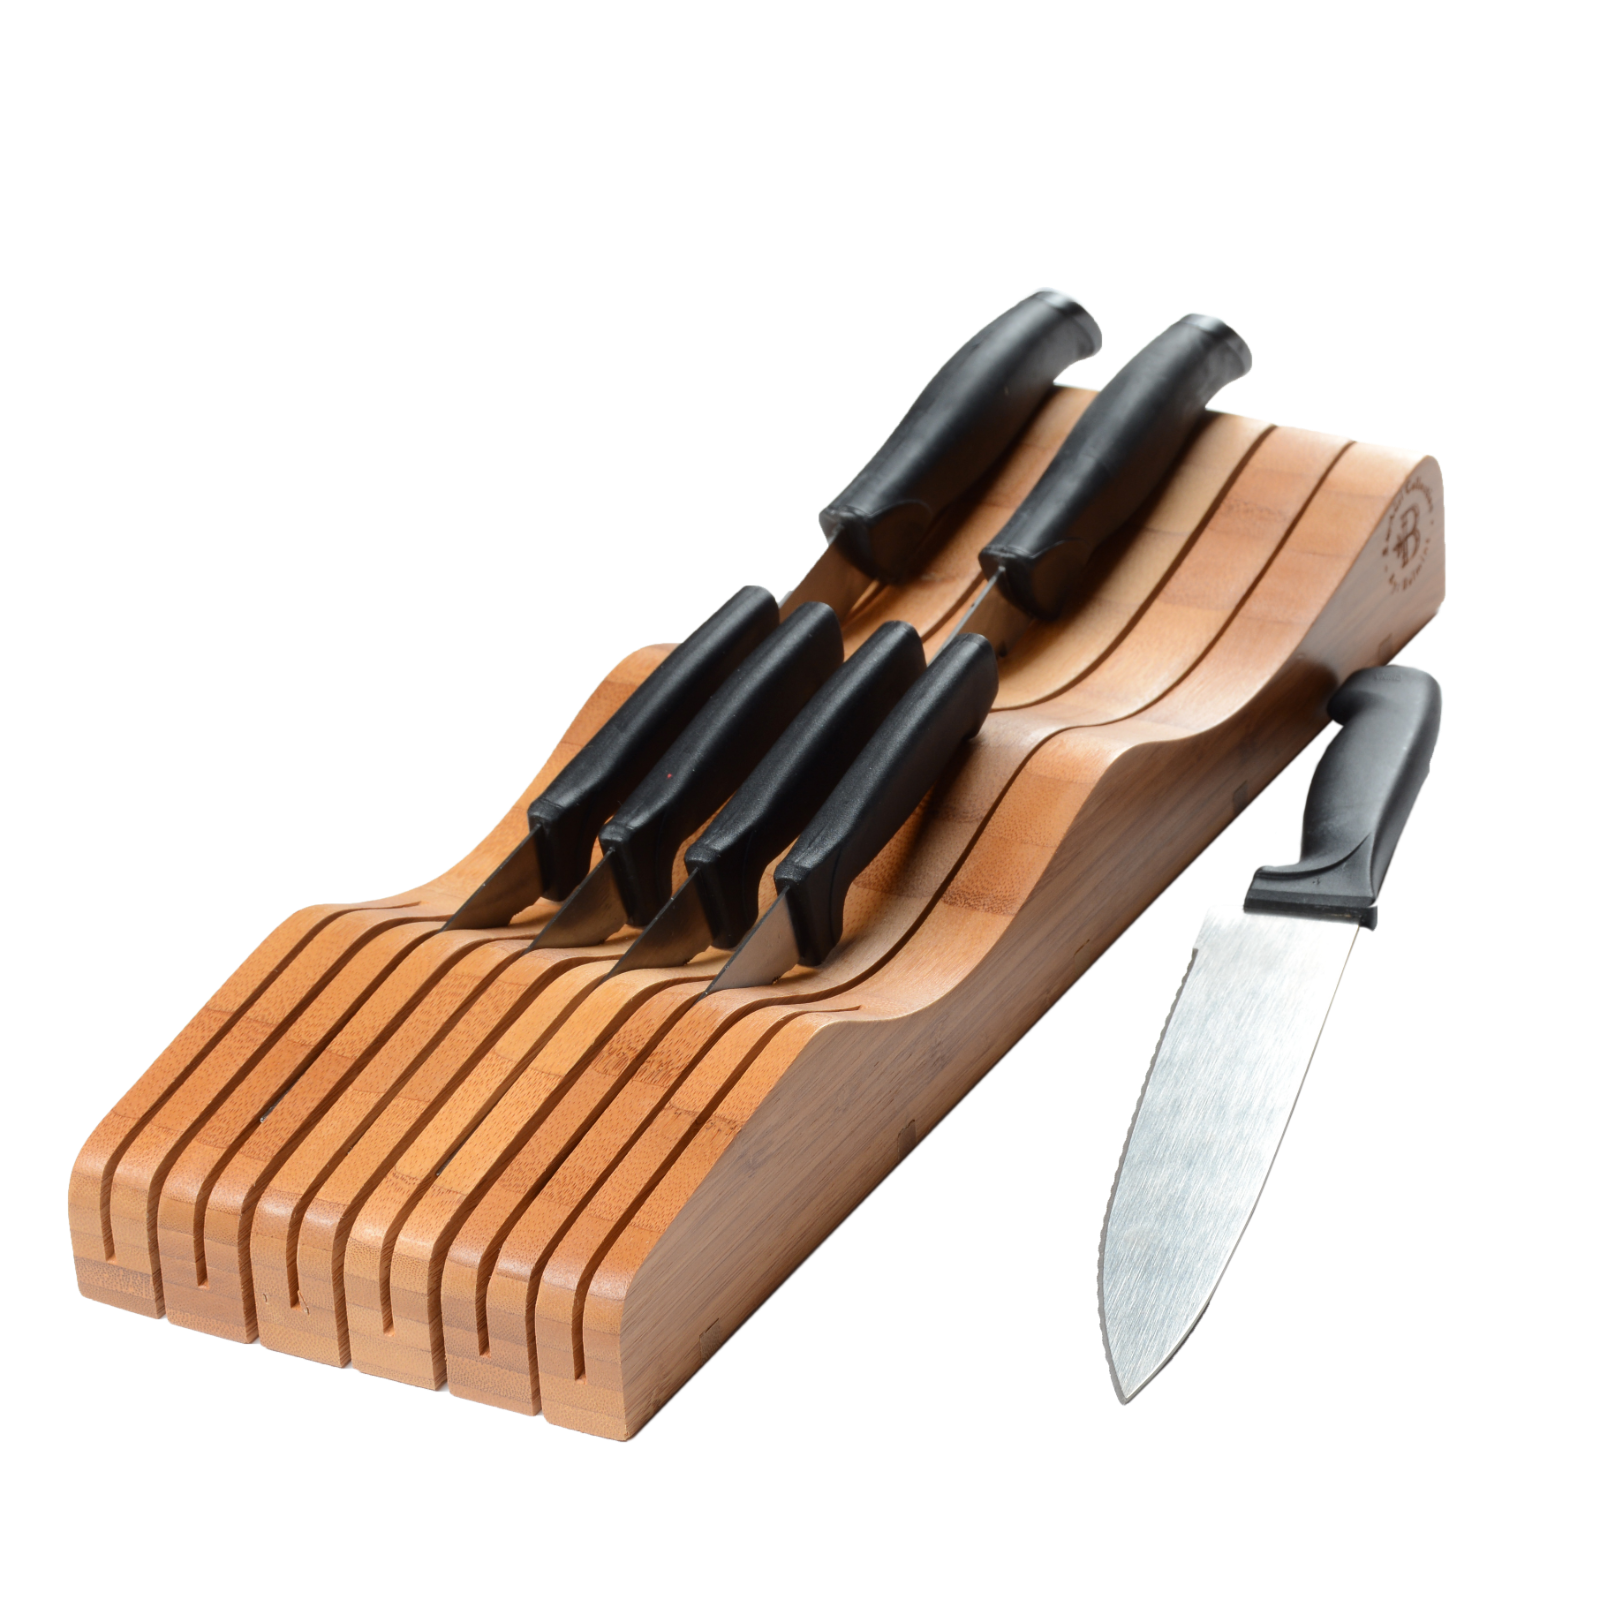 Knife Block Storage Organizer For Drawers Designed To Hold 10-15 Knives